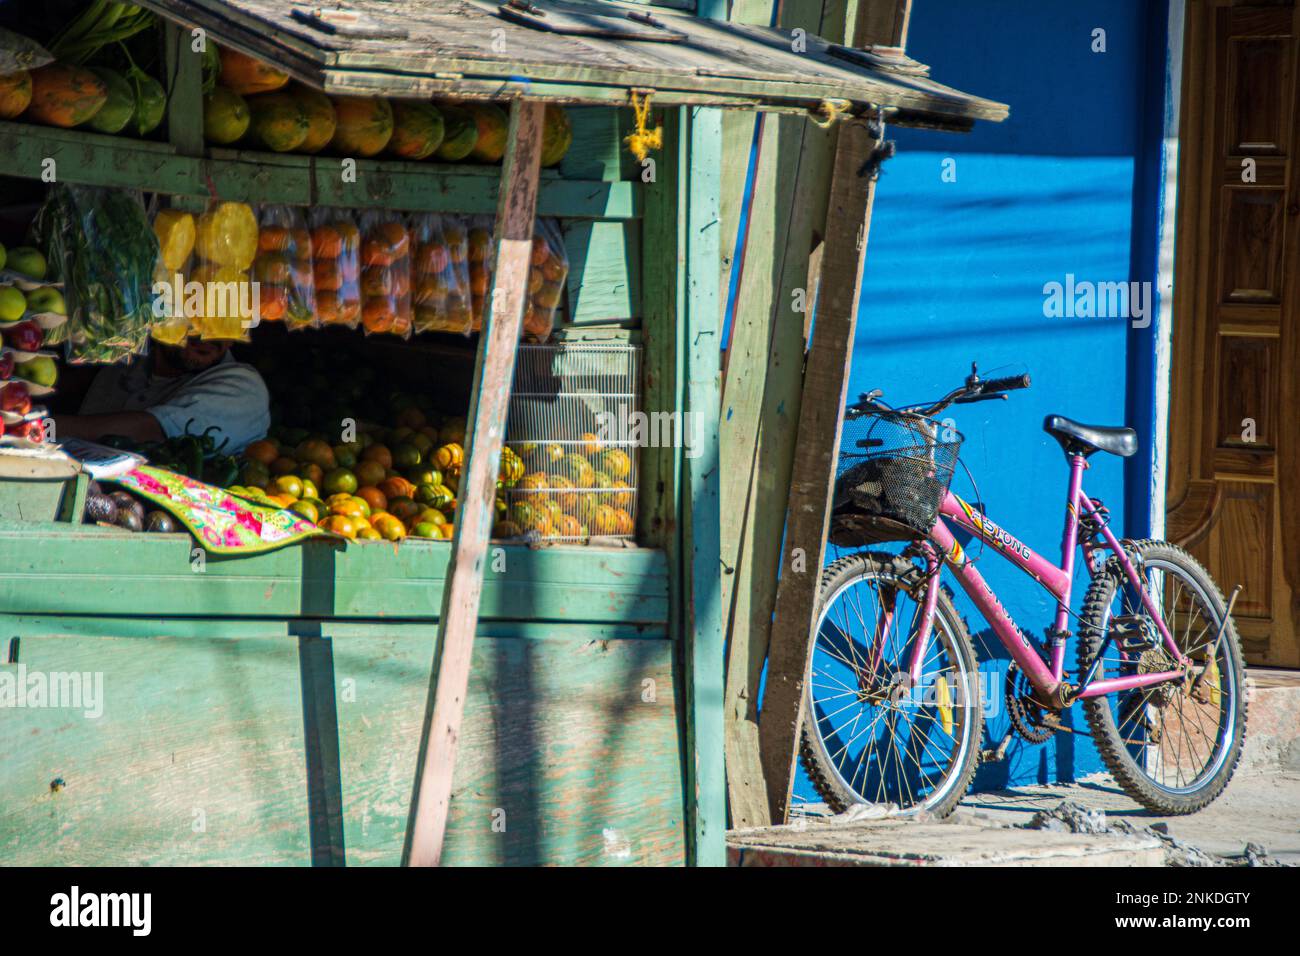 A fruit stand and a pink bike leaning against a blue wall of a building, Roatan, Honduras. Stock Photo